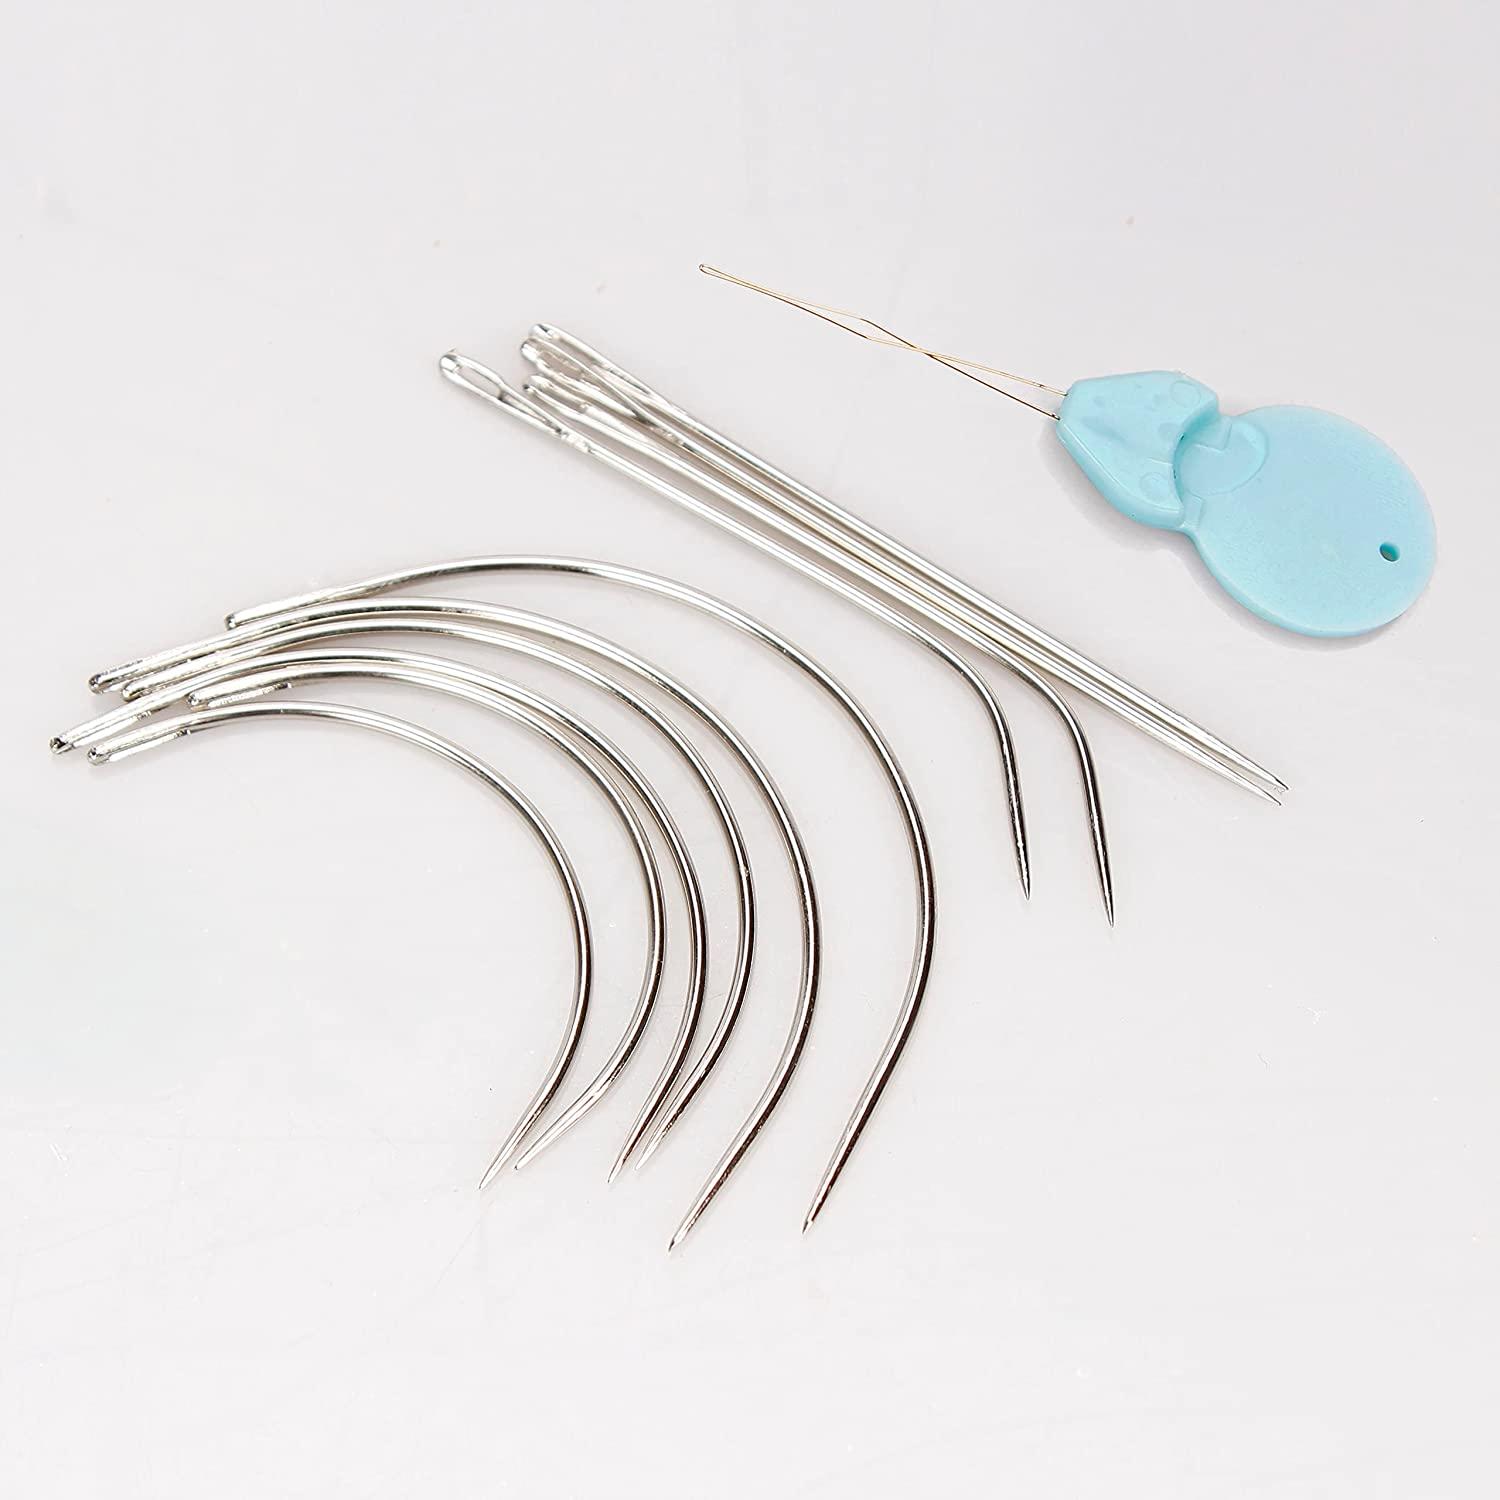 Buy Different Sizes Curved Needle C Type For Wig Hold Weaving Needle Hand Sewing  Needles from IM TECEDGE INTERNATIONAL MFG COMPANY, Pakistan